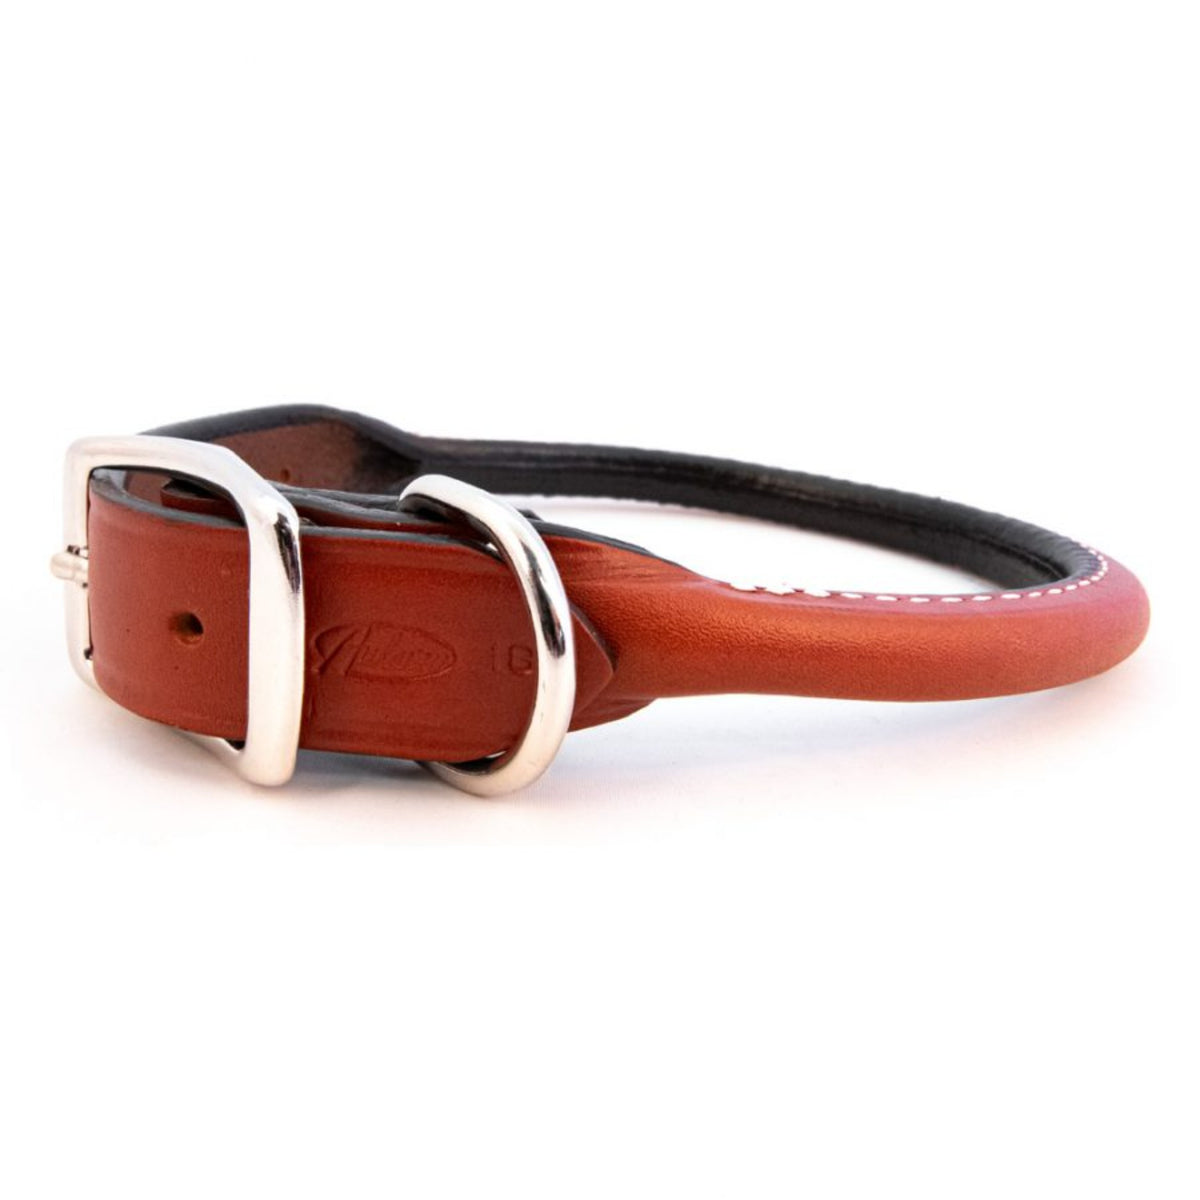 Auburn Leathercrafters Round Combination Dog Collar Color: Tan